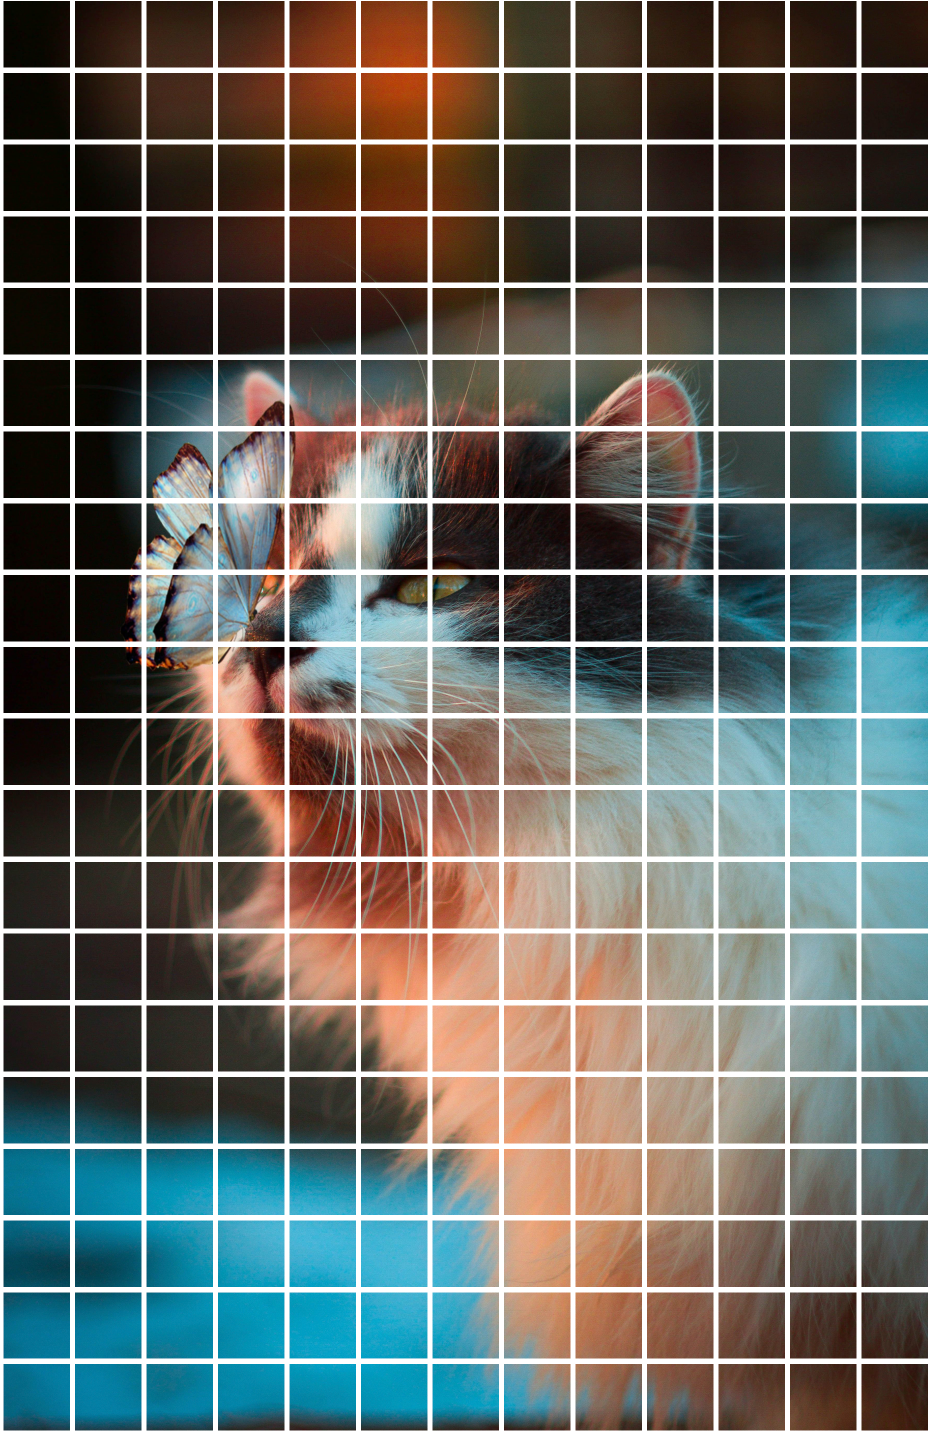 Cat image split into small 256x256 pixel patches.